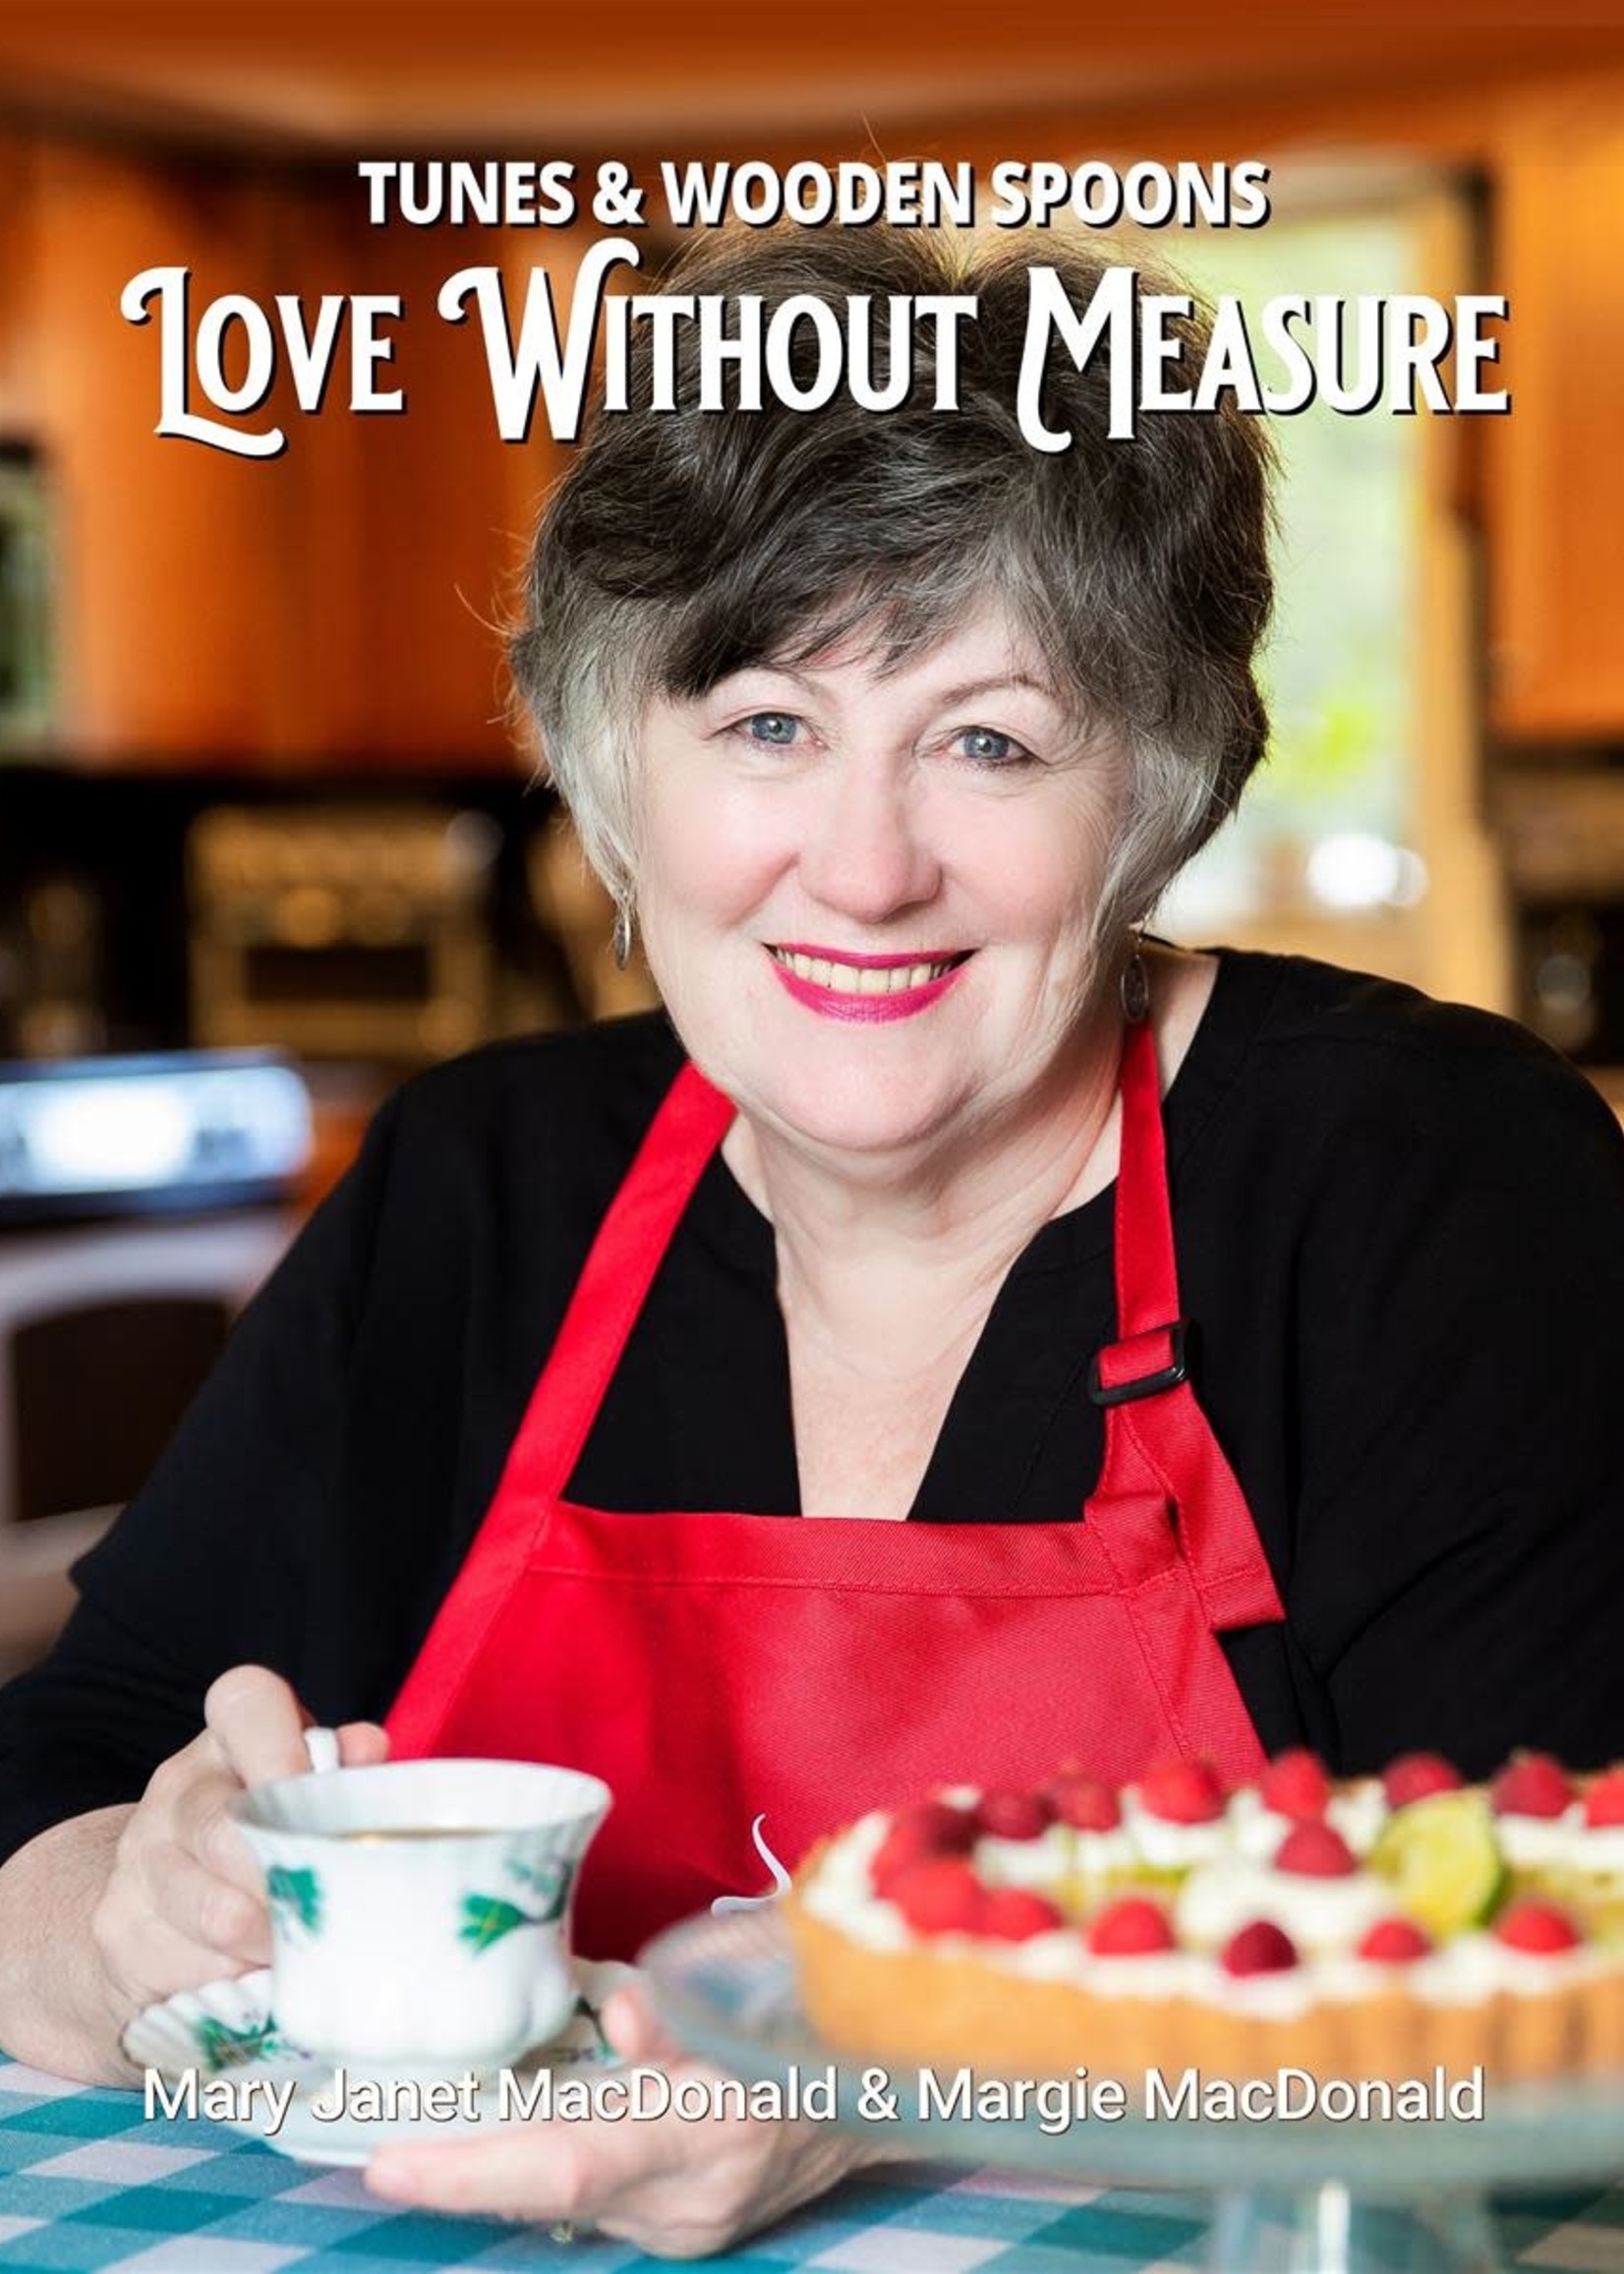 Tunes and Wooden Spoons: Love Without Measure by Mary Janet MacDonald